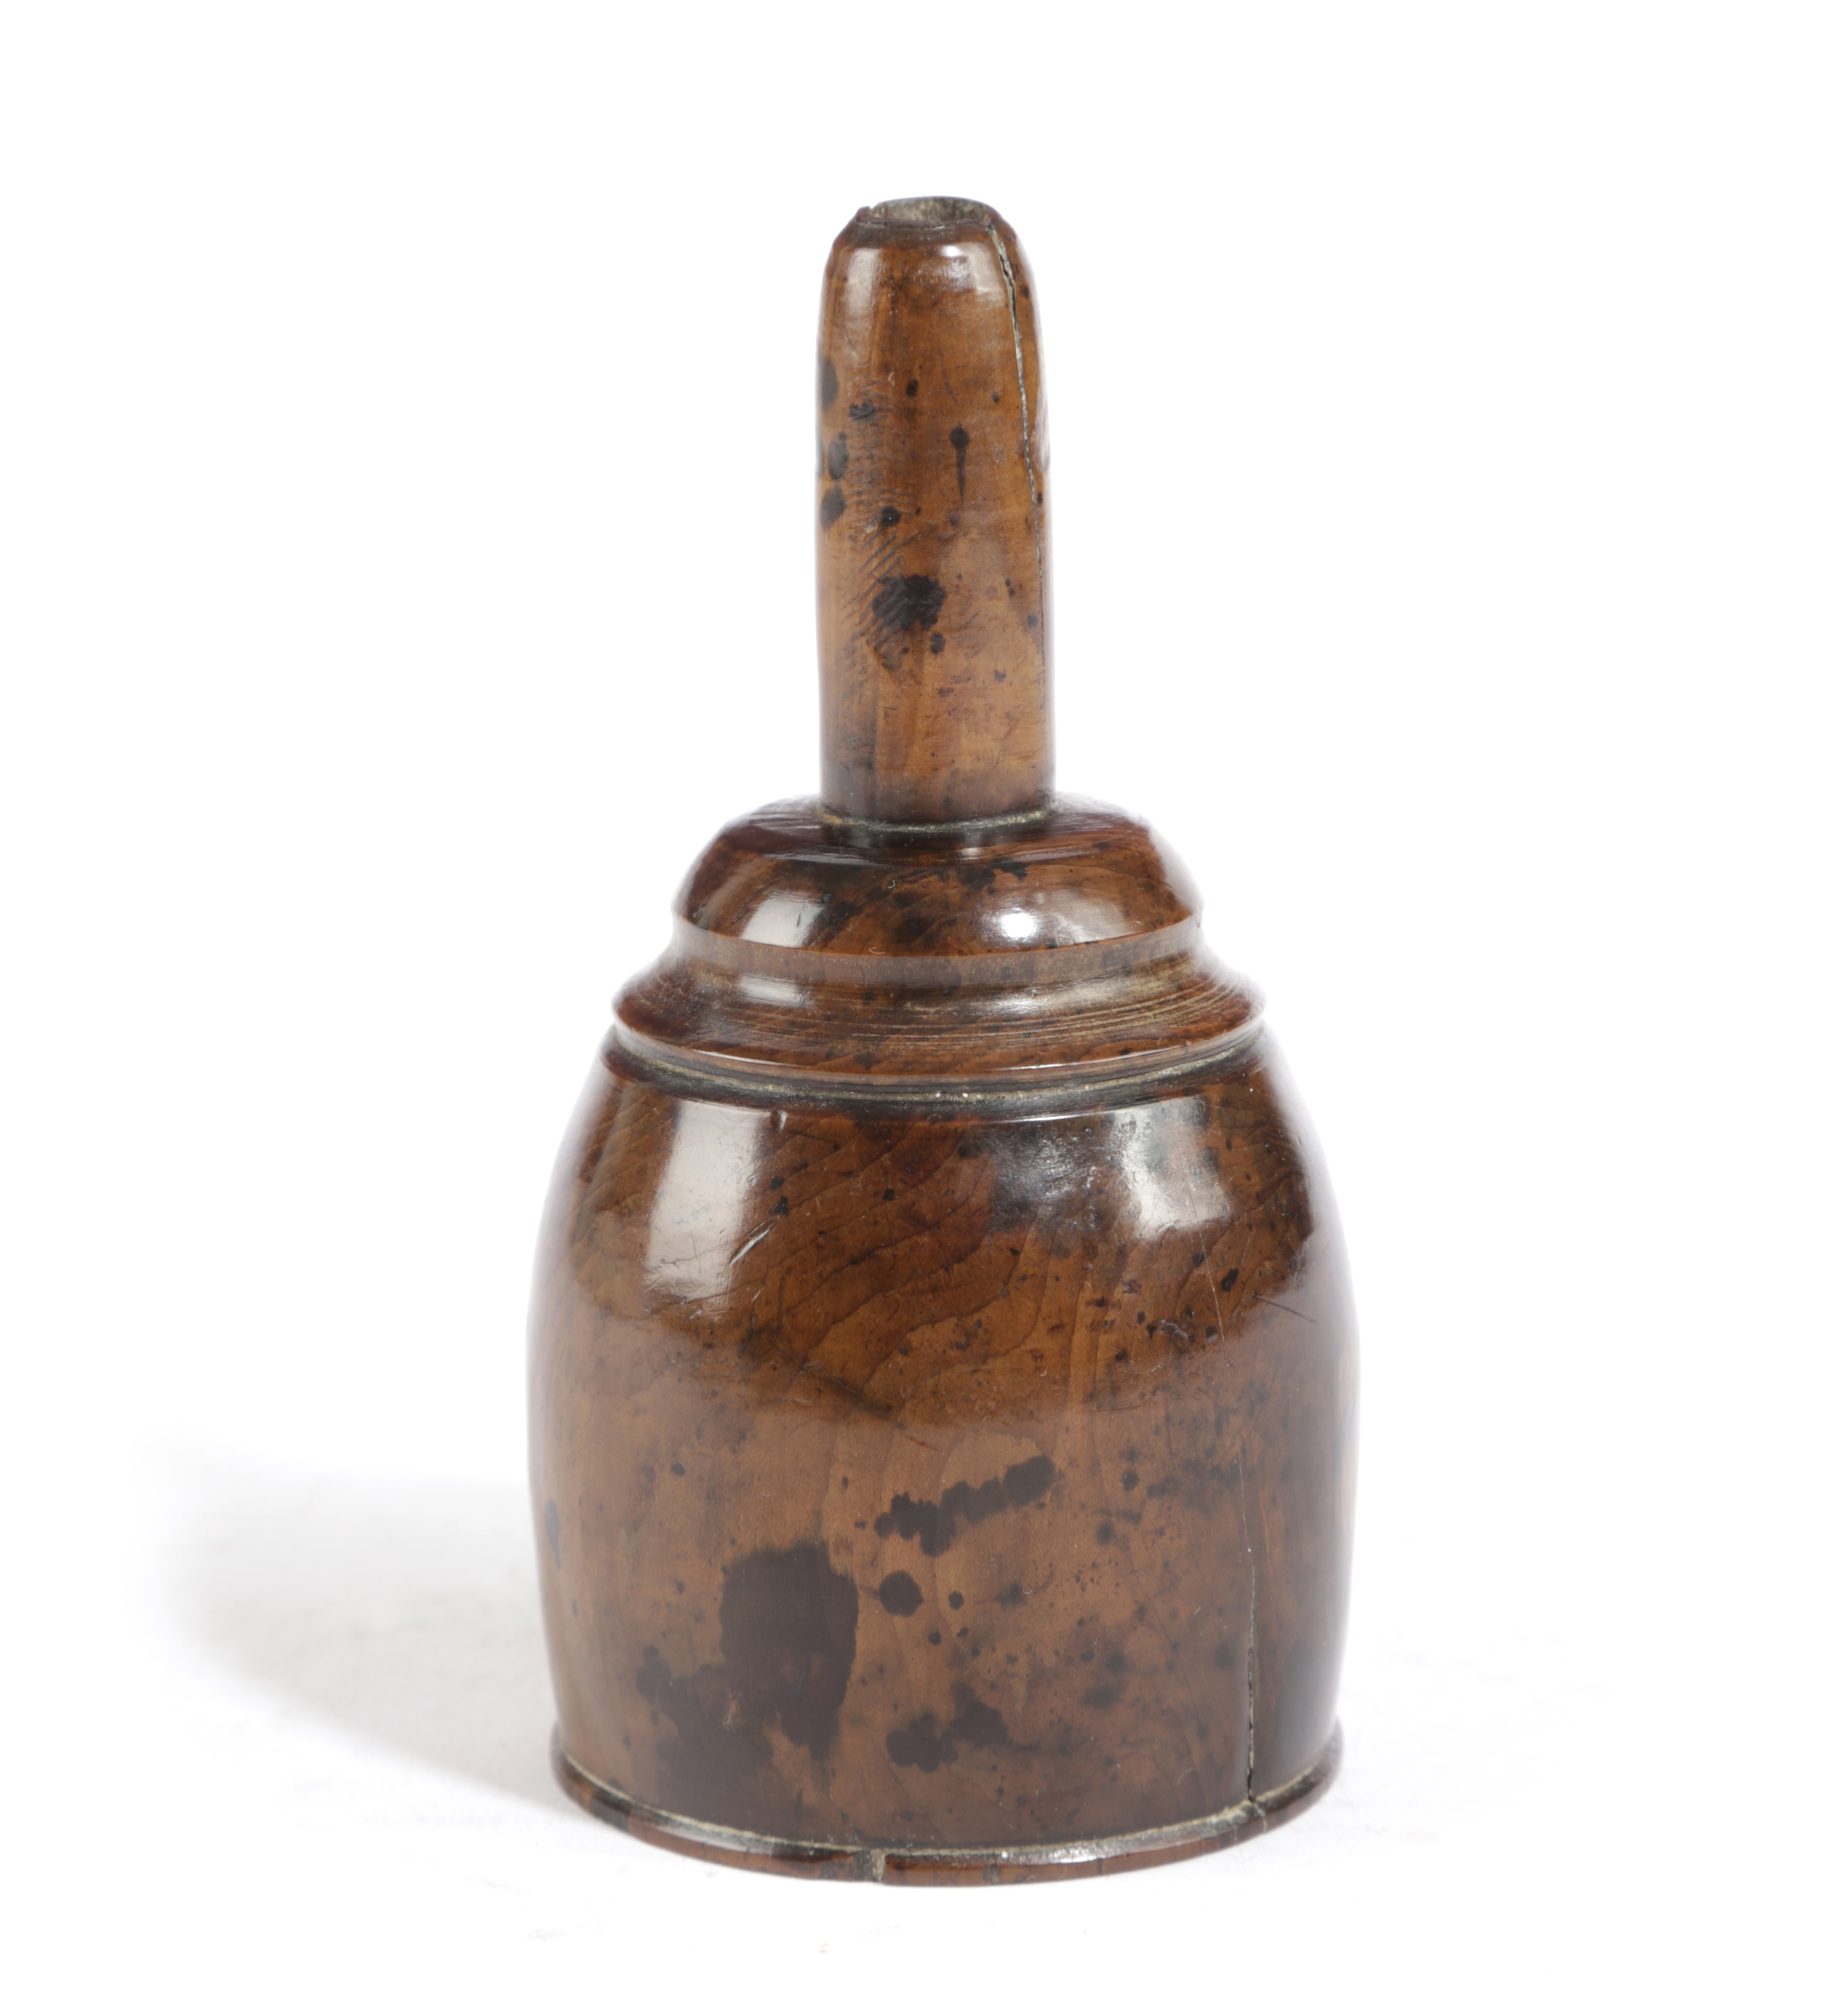 A GEORGE III TREEN YEW WINE FUNNEL LATE 18TH / EARLY 19TH CENTURY 12.3cm high Provenance The